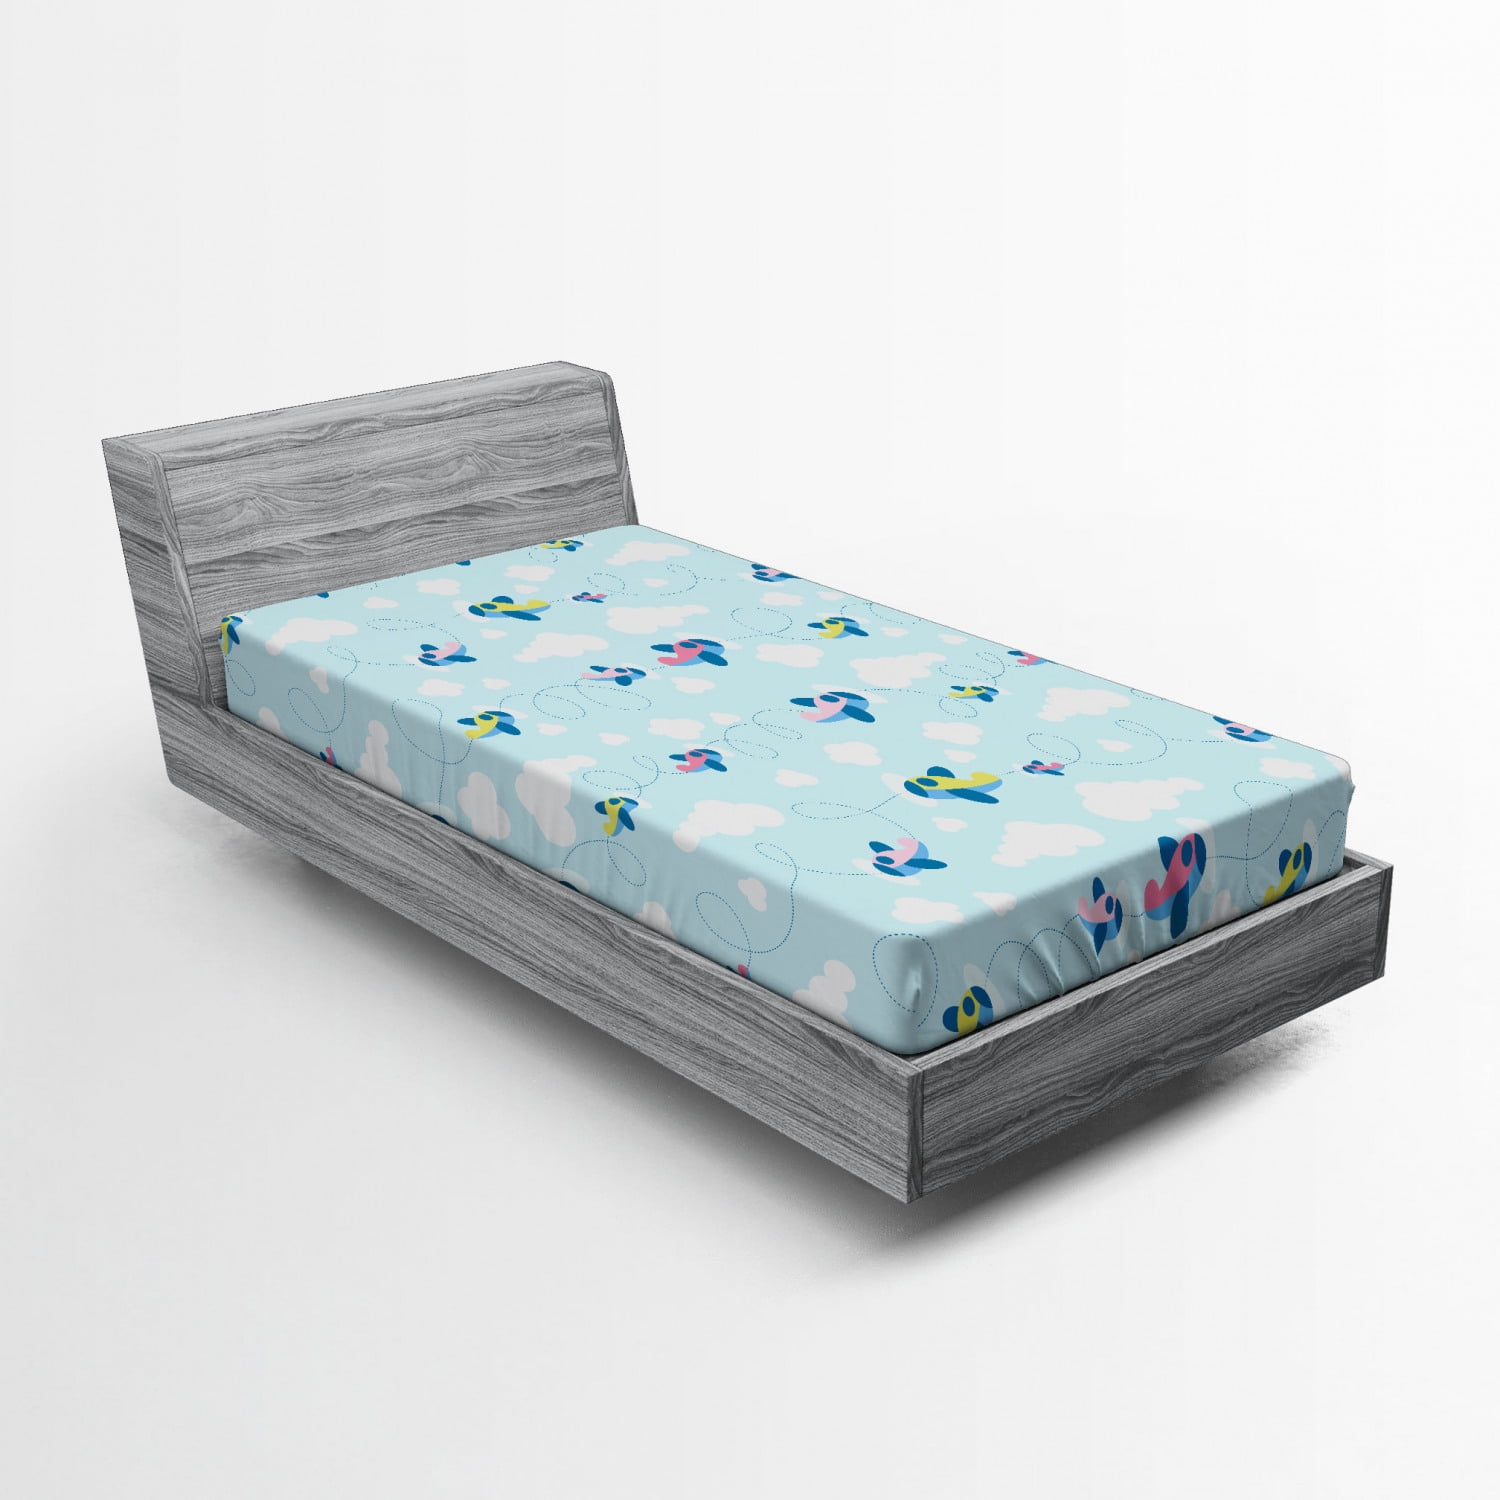 Plane Fitted Sheet, Cartoon Style Sky with Airplanes and Clouds Swirls ...